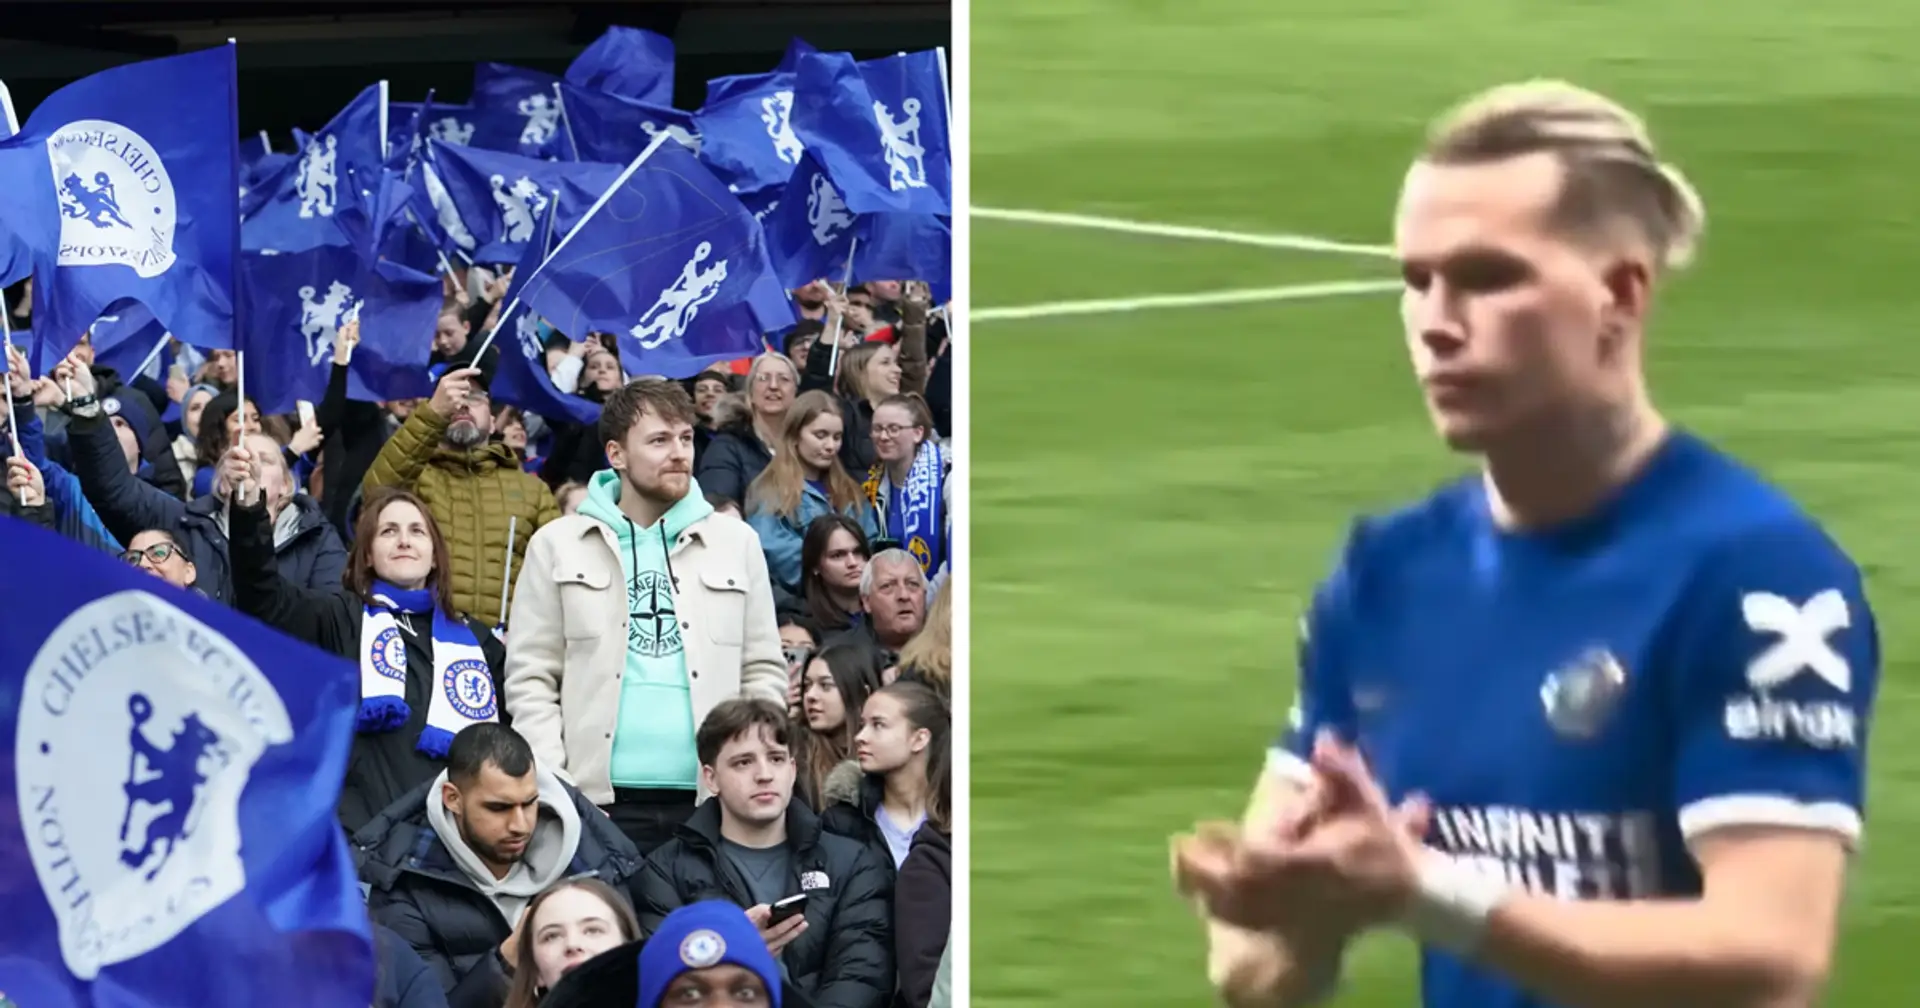 A full stadium of applause: how Chelsea fans hailed Mudryk when he was subbed off